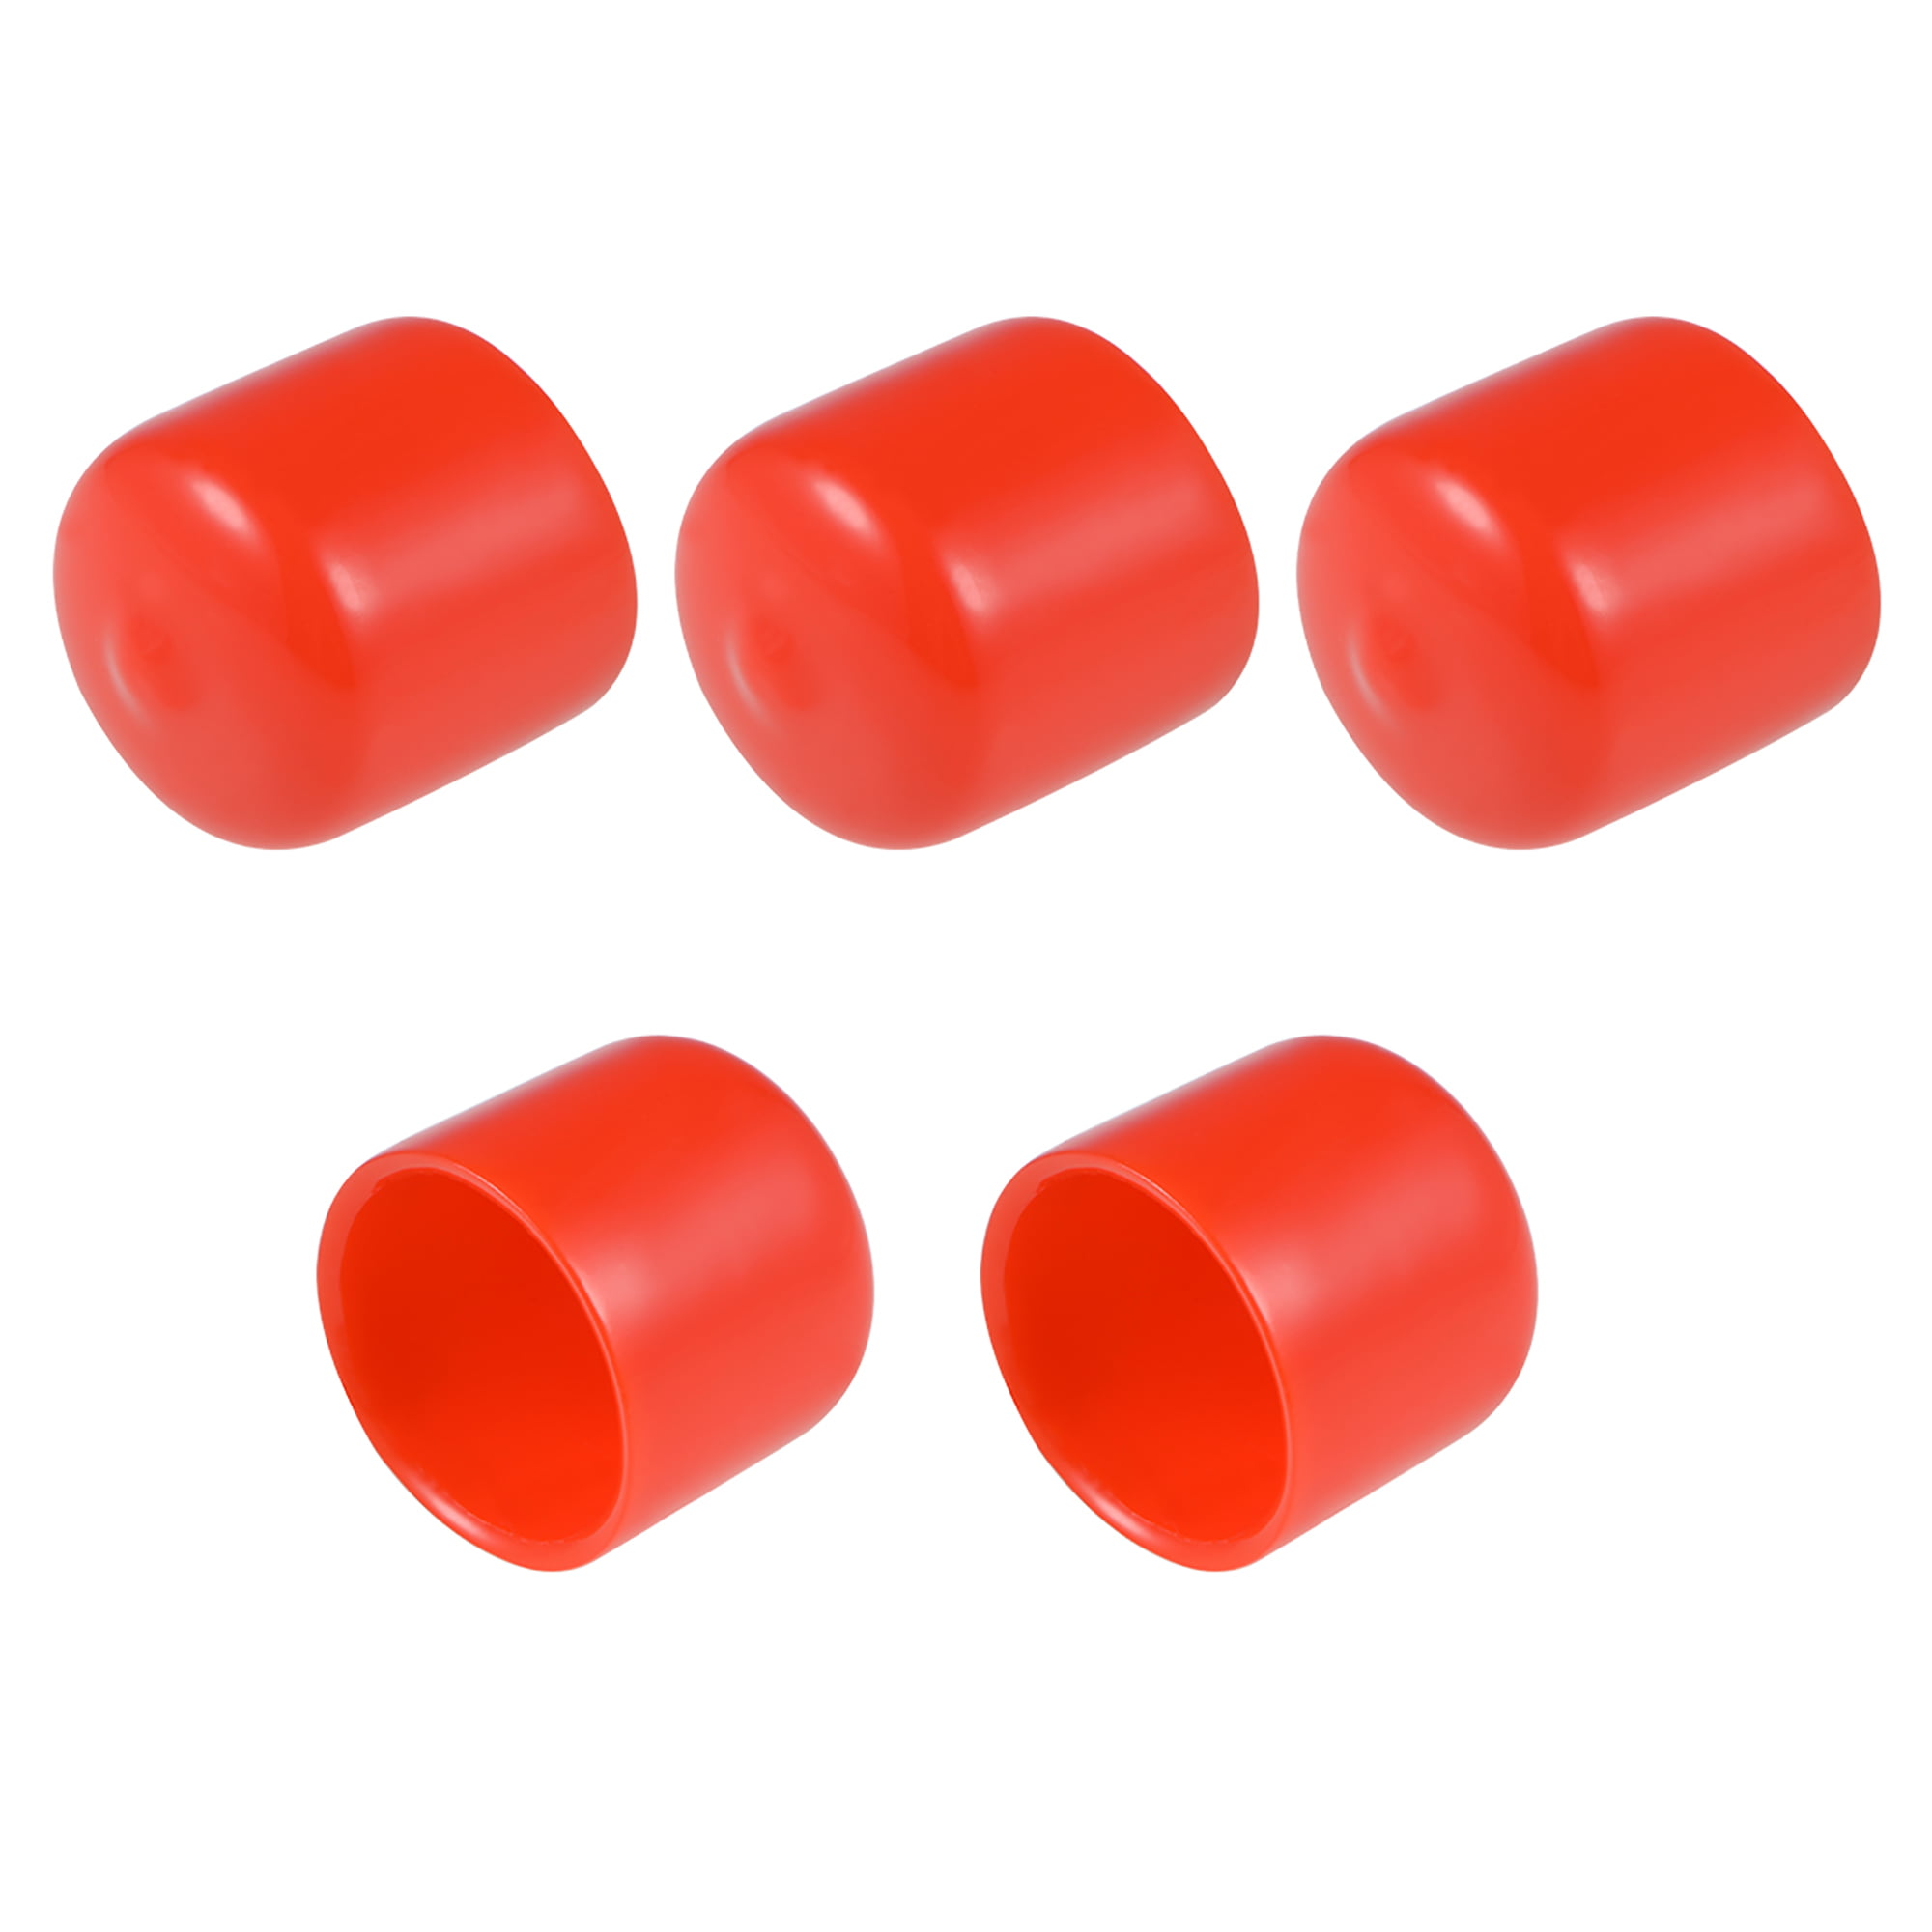 uxcell 200pcs Rubber End Caps 5/16 8mm ID Vinyl Round End Cap Cover Screw Thread Protectors Red 